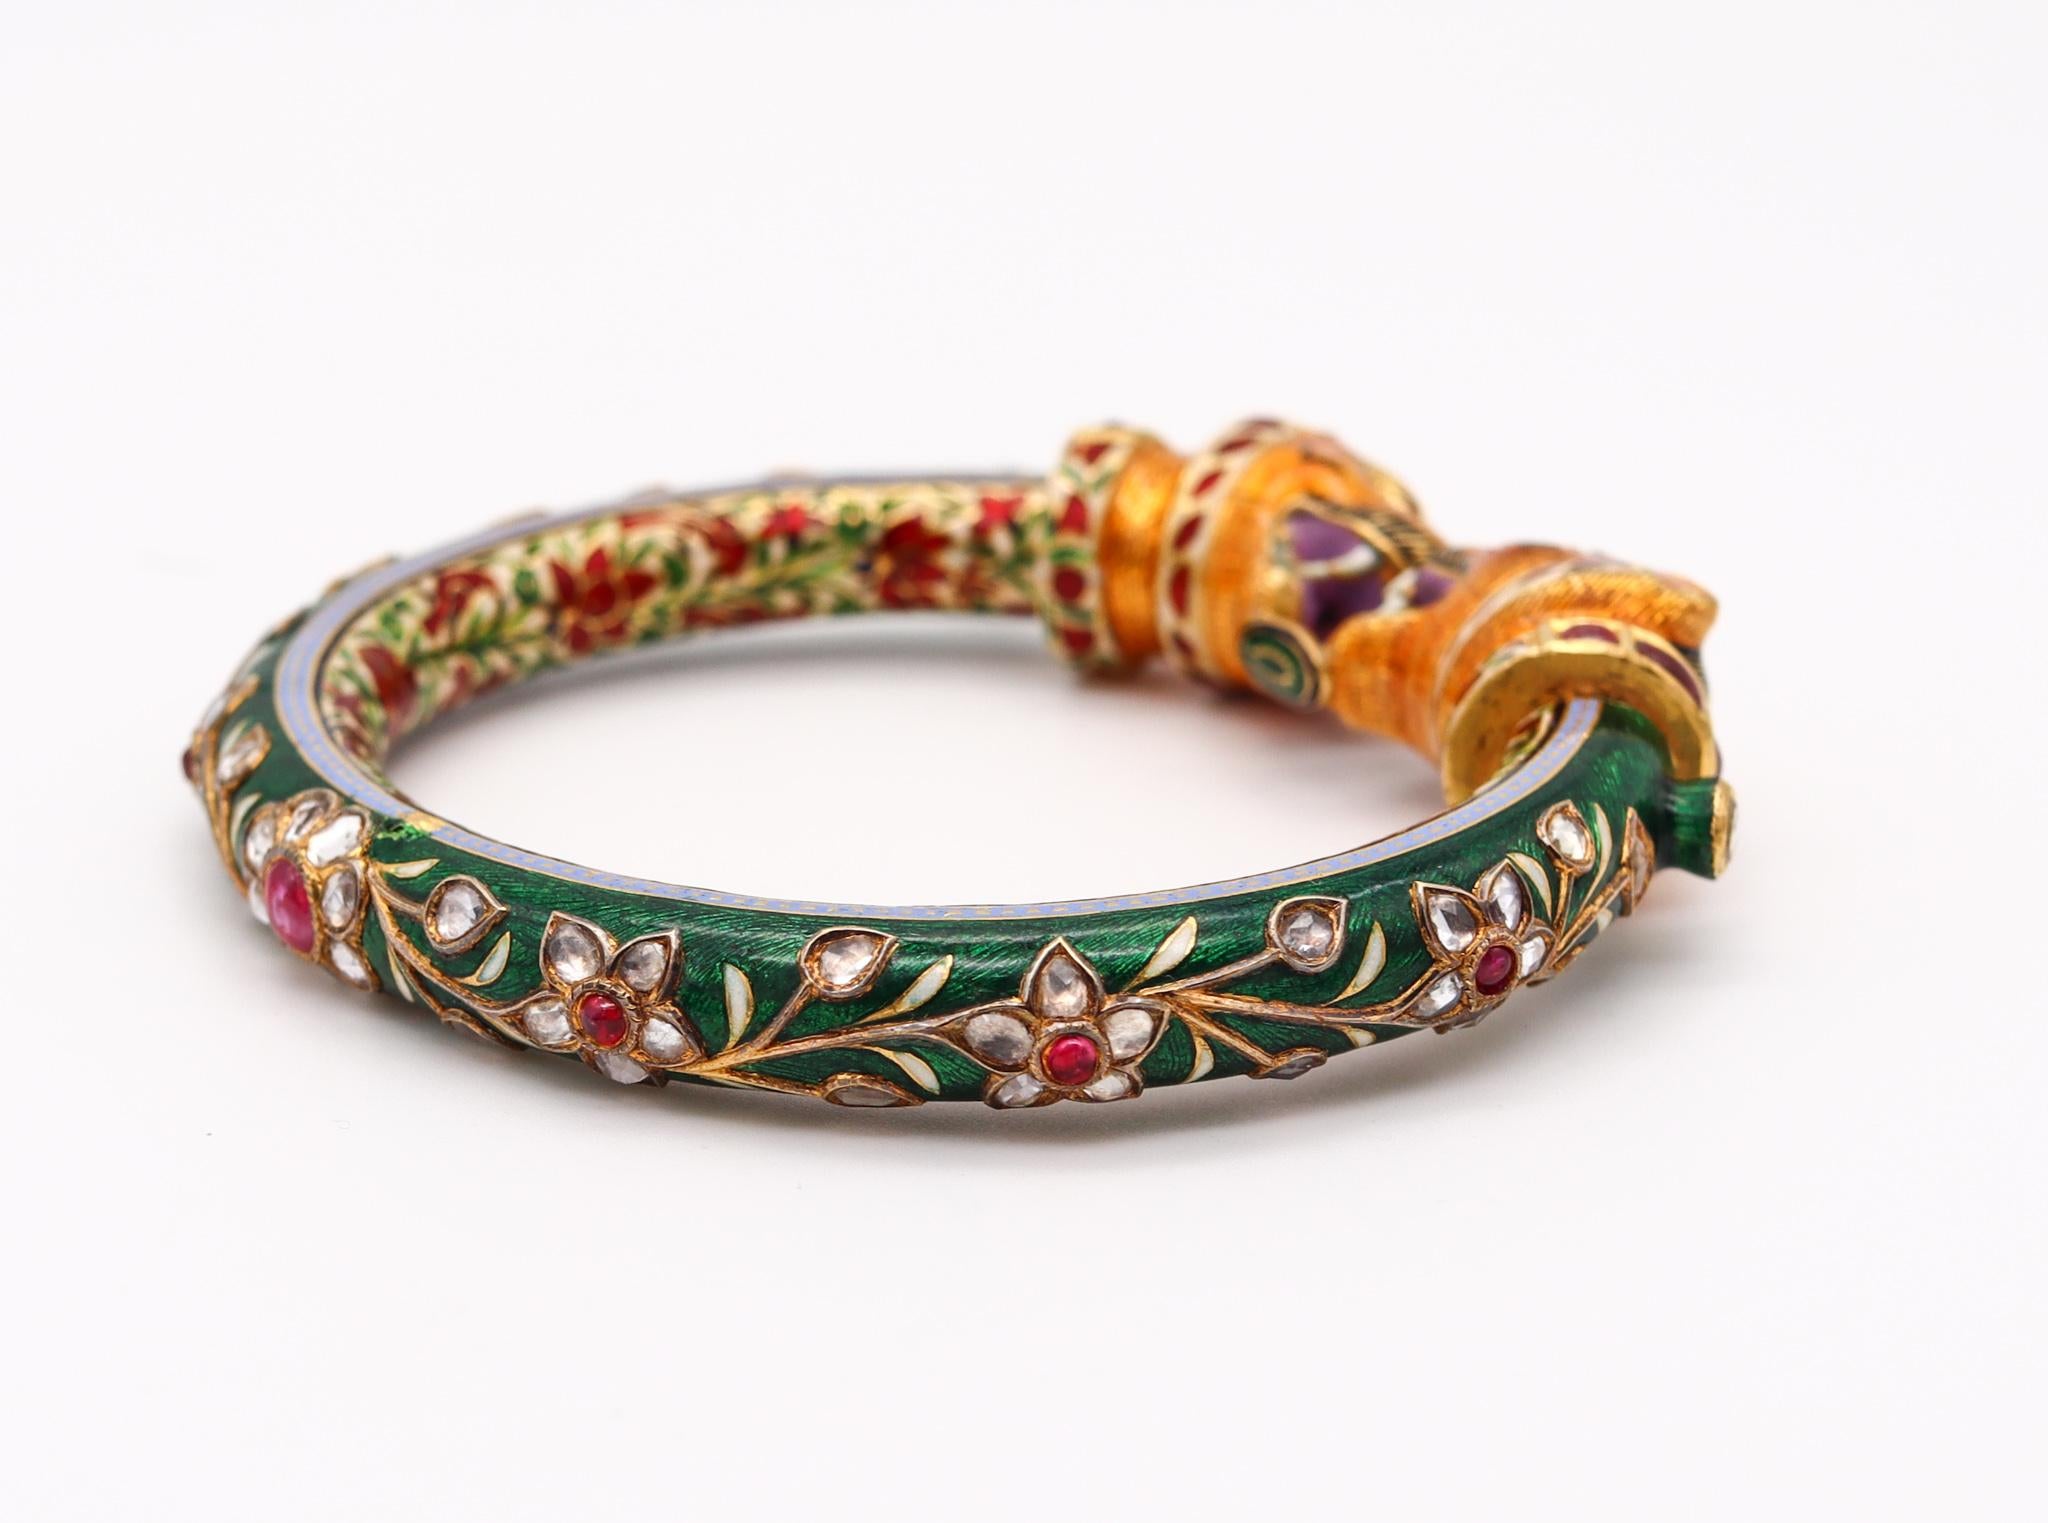 Anglo-Indian Mughal Empire Vintage Enameled Bracelet 22Kt Gold 8.93 Ctw in Diamonds & Rubies For Sale